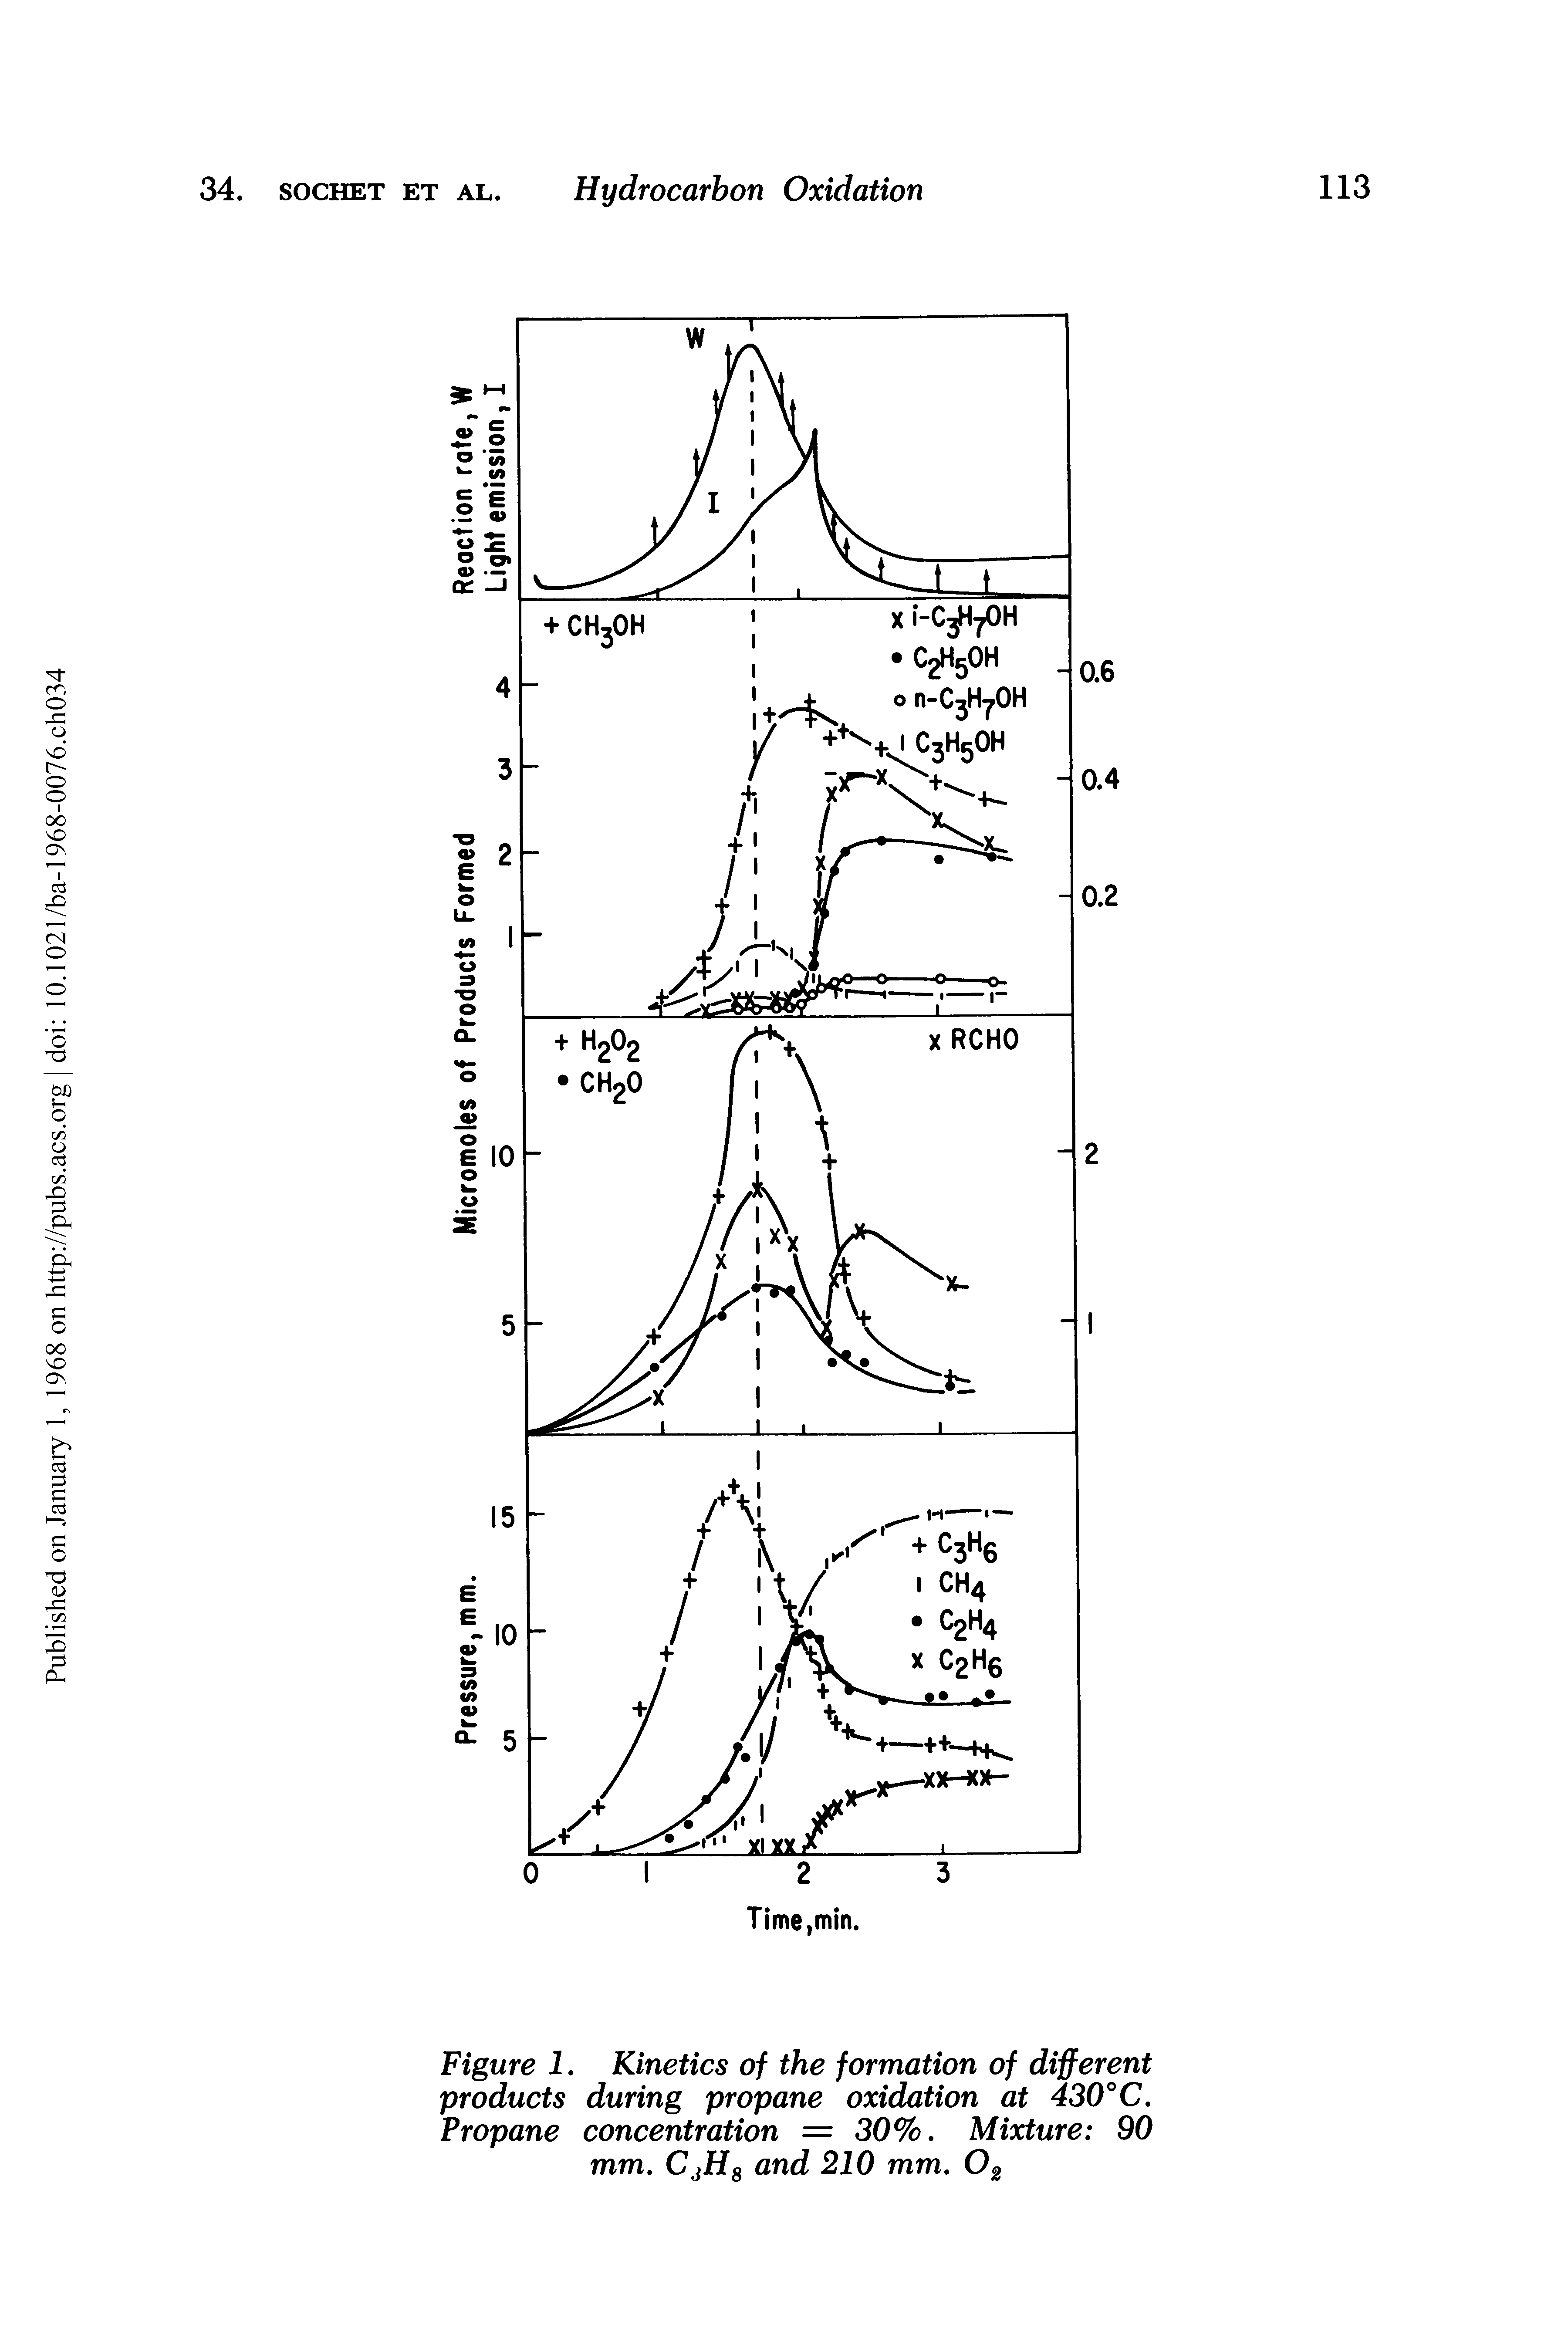 Figure 1. Kinetics of the formation of different products during propane oxidation at 430°C. Propane concentration = 30%. Mixture 90 mm. C3H8 and 210 mm. 02...